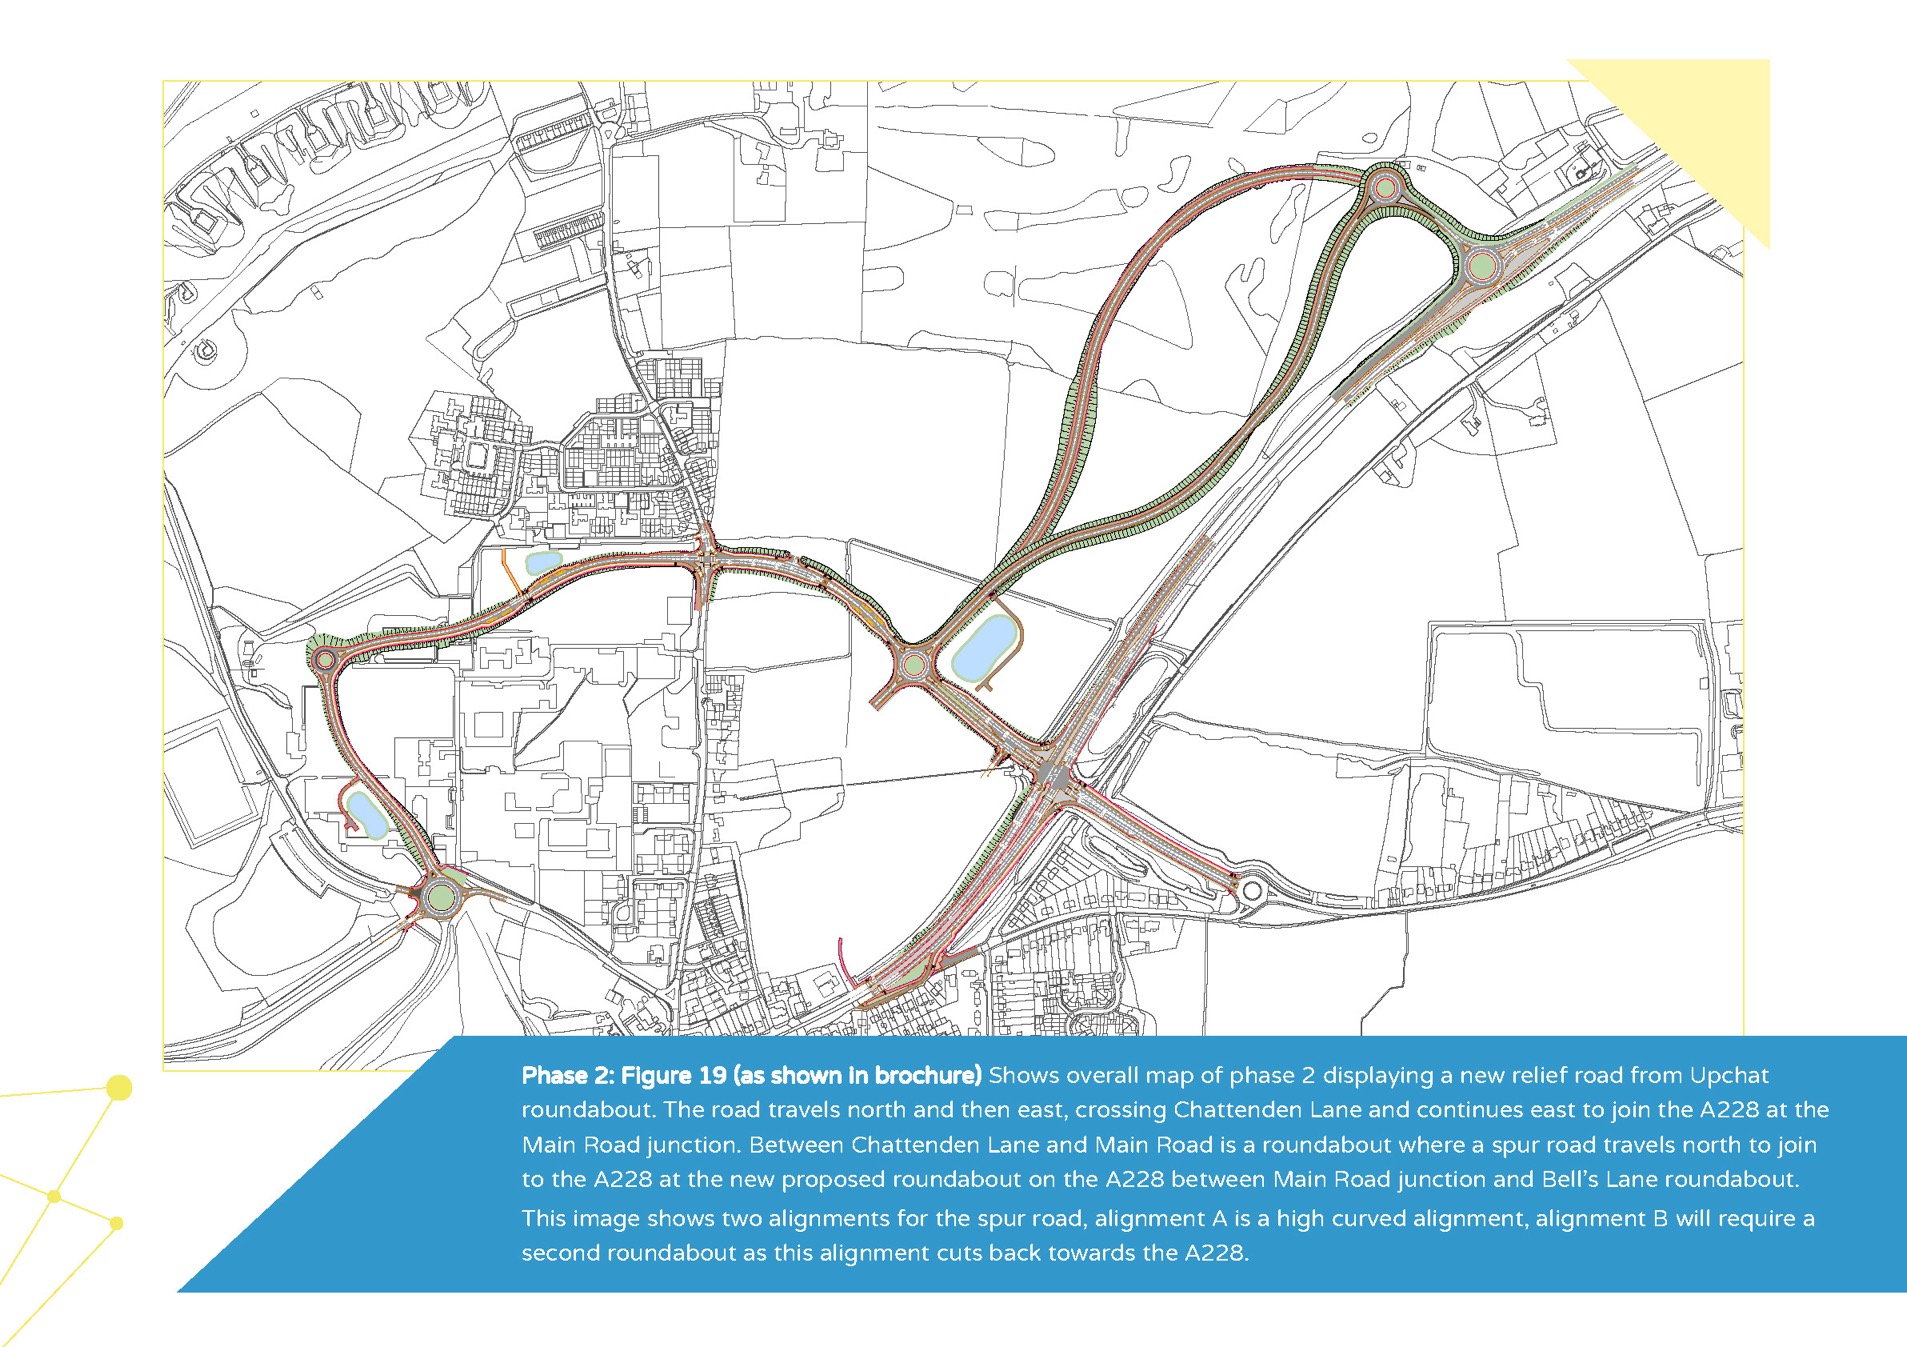 Overall map of phase 2 displaying a new relief road from Upchat roundabout